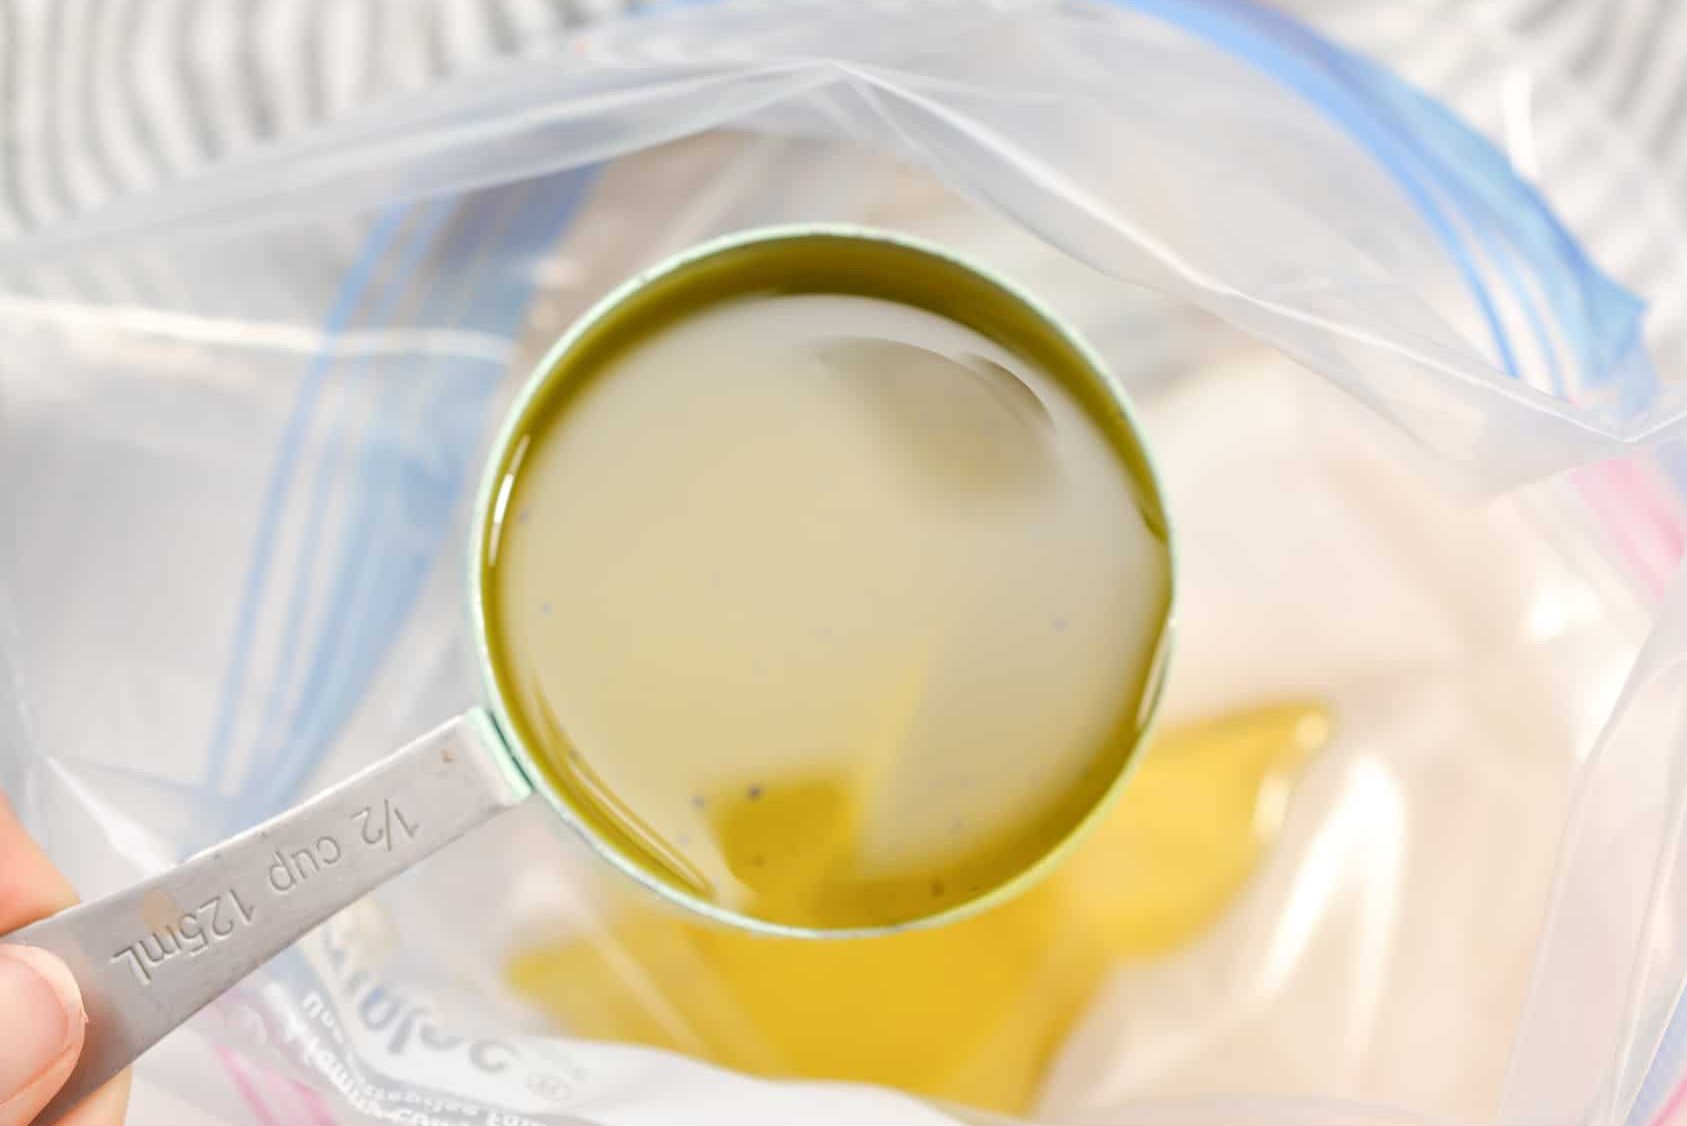 In a Ziploc bag lace ½ cup of olive oil.